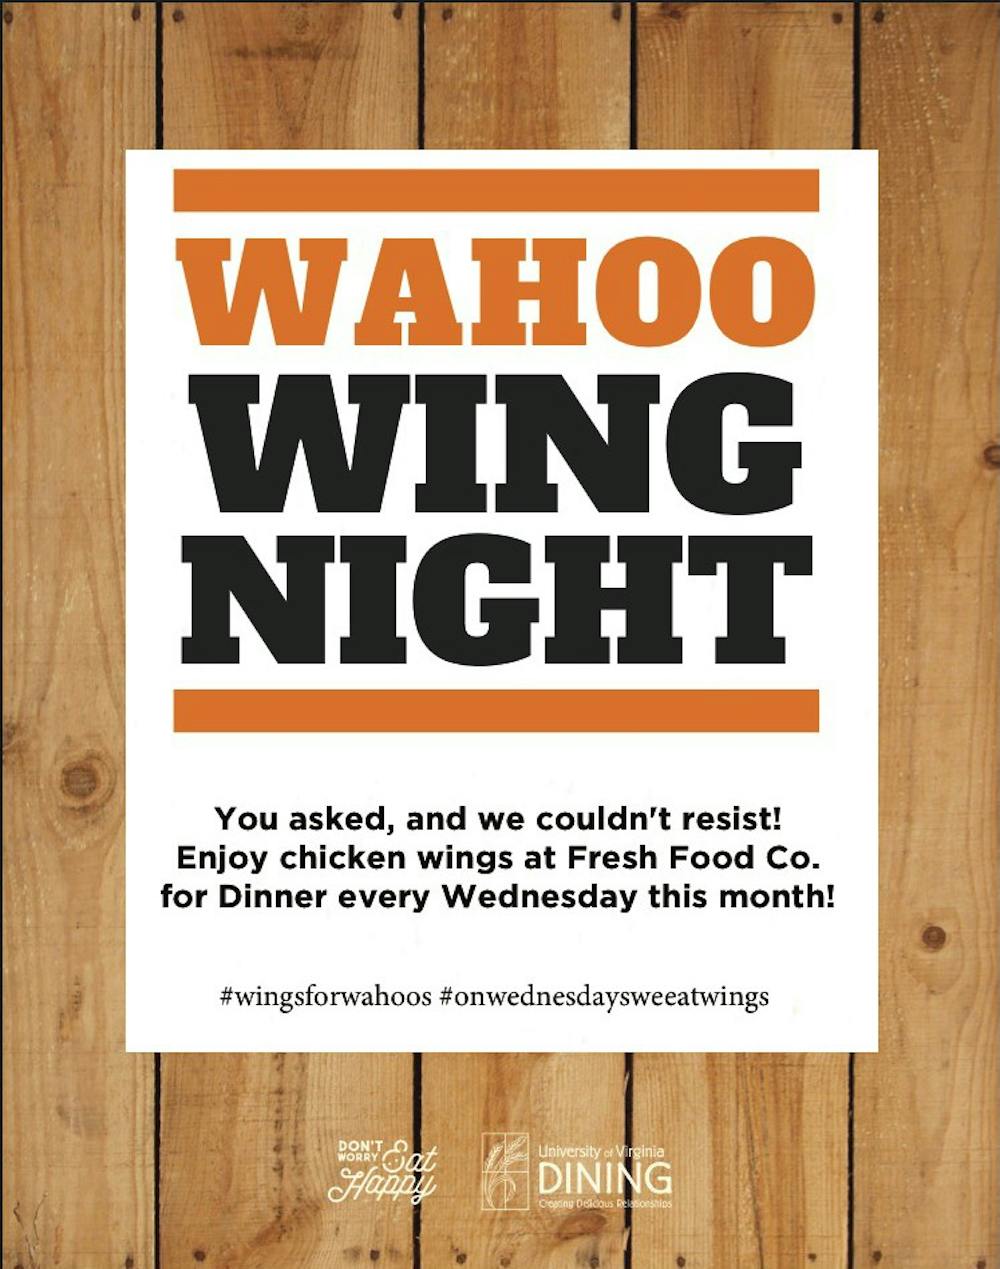 <p>As a result of Cintron's Twitter campaign, Wings have temporarily been added to Fresh Food Co.'s regular meal rotation.</p>